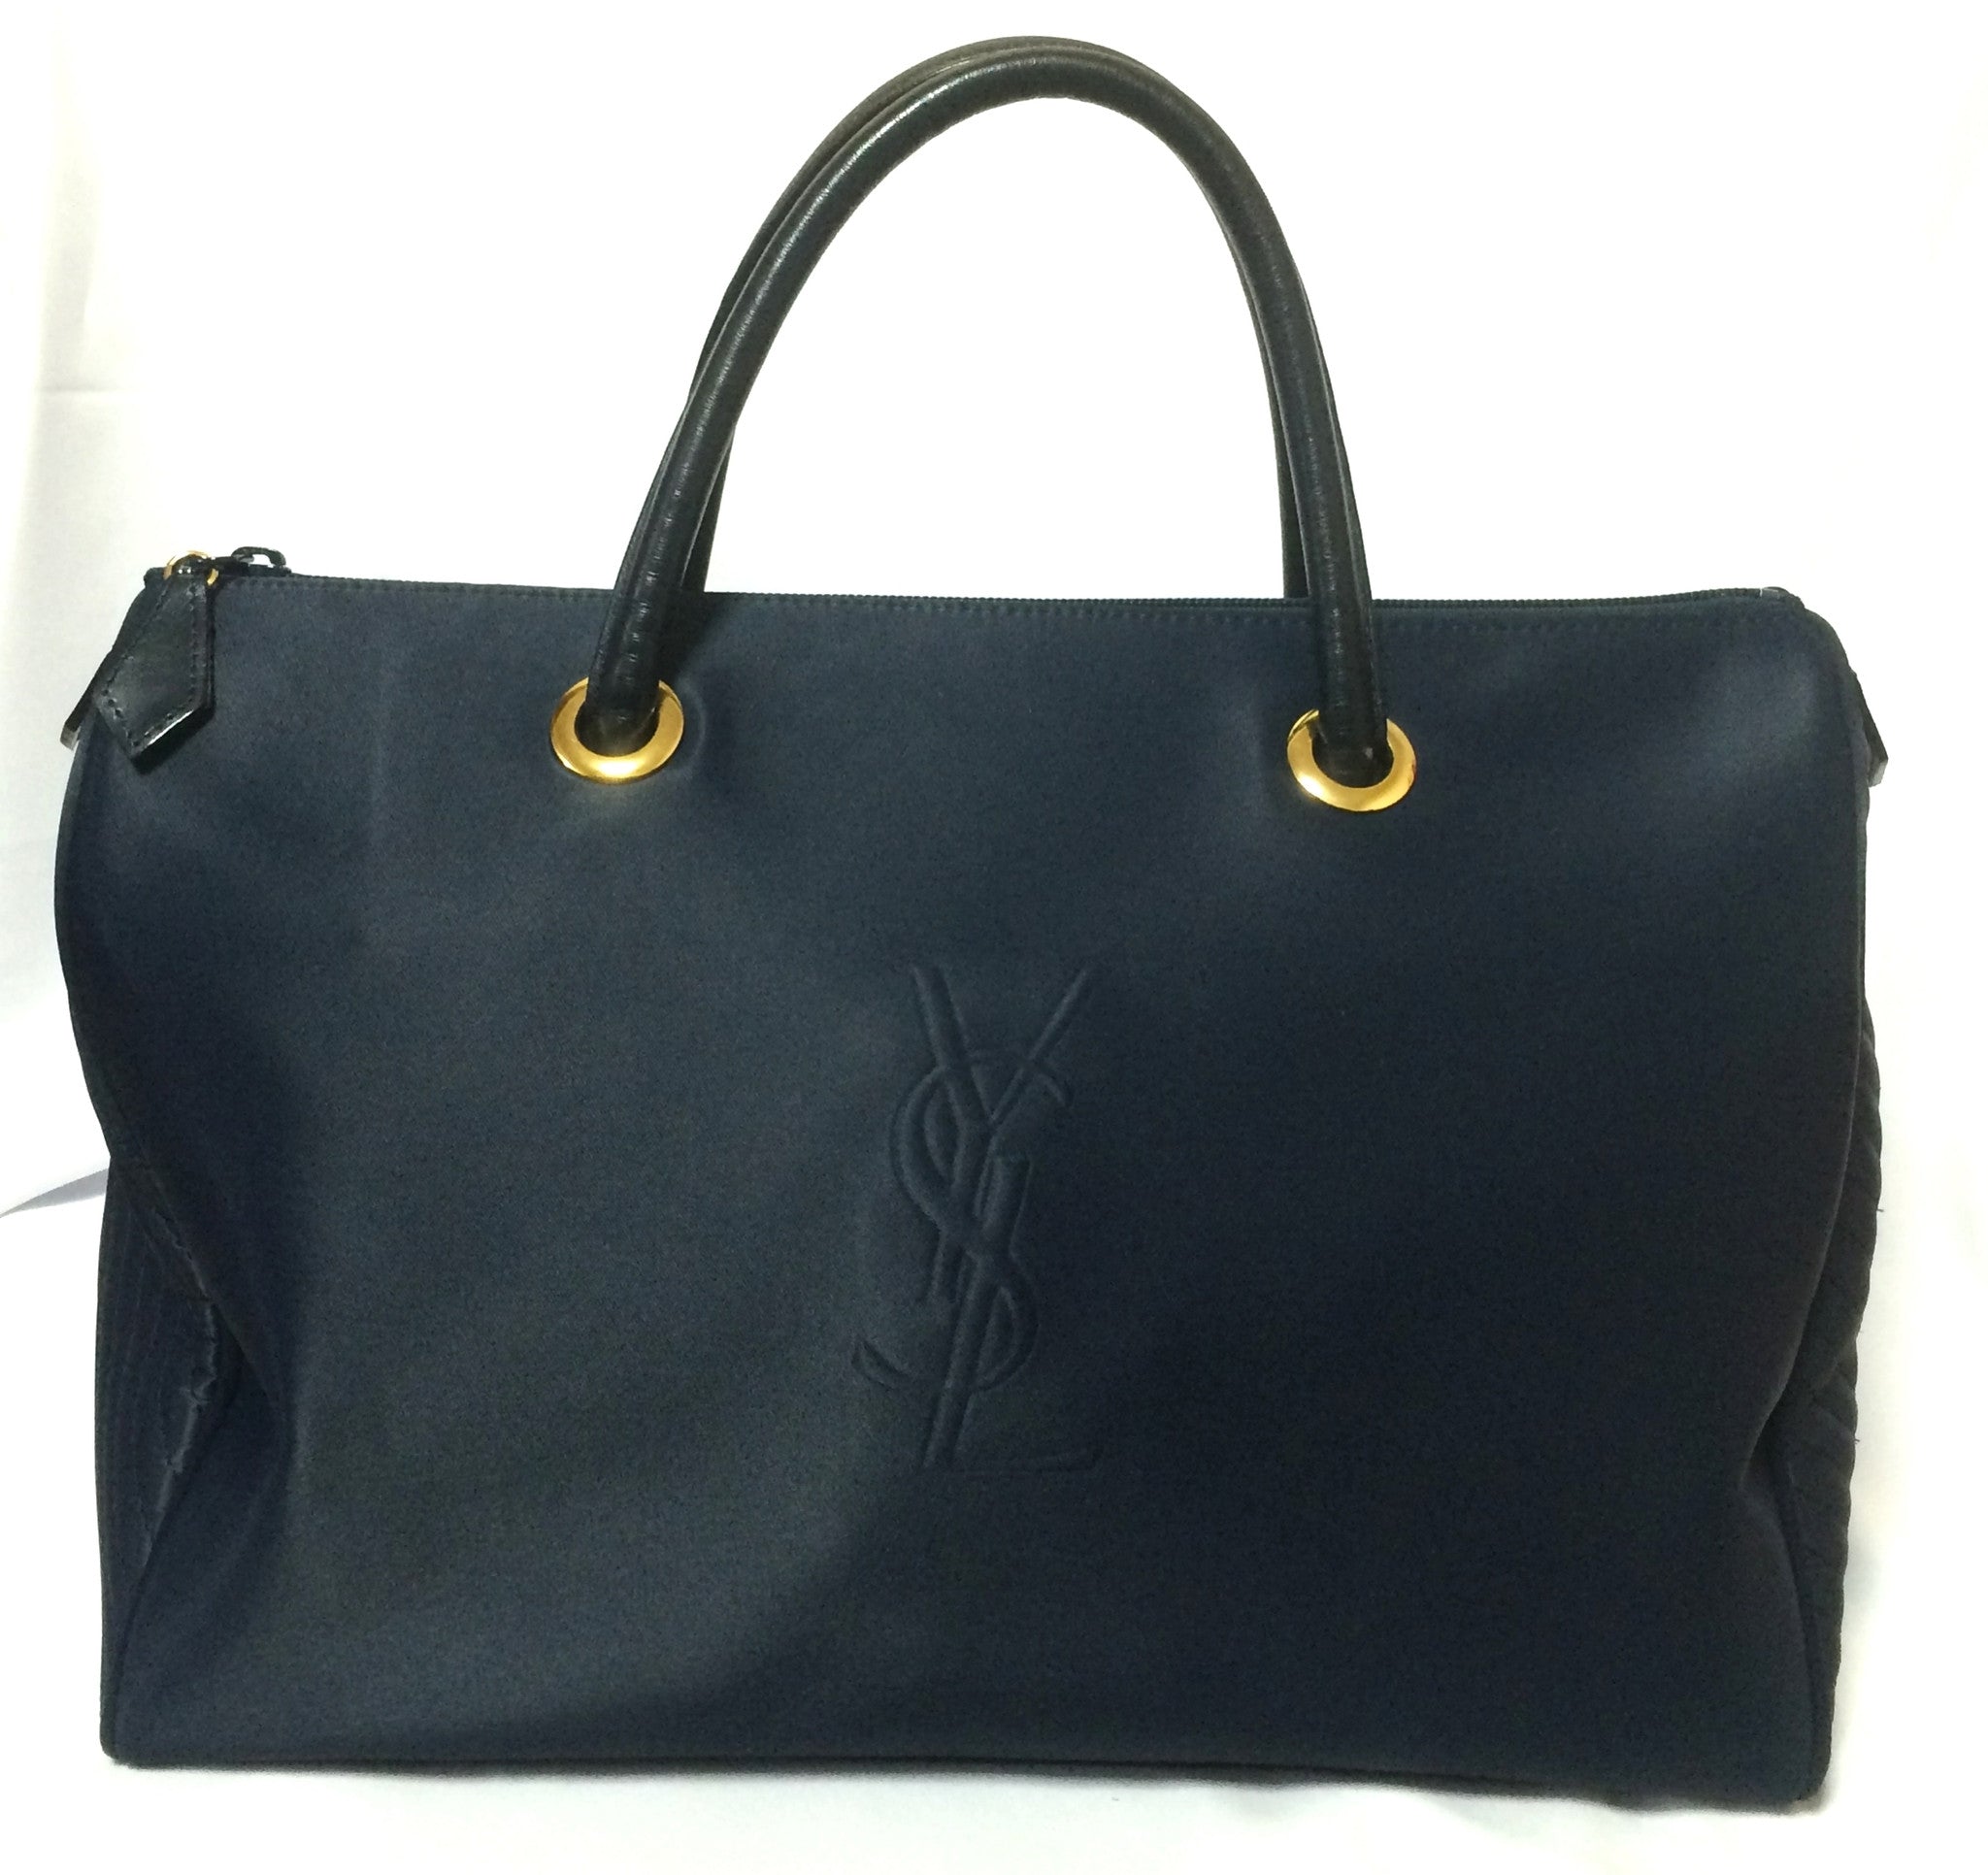 Yves Saint Laurent Cabas Chyc Tote